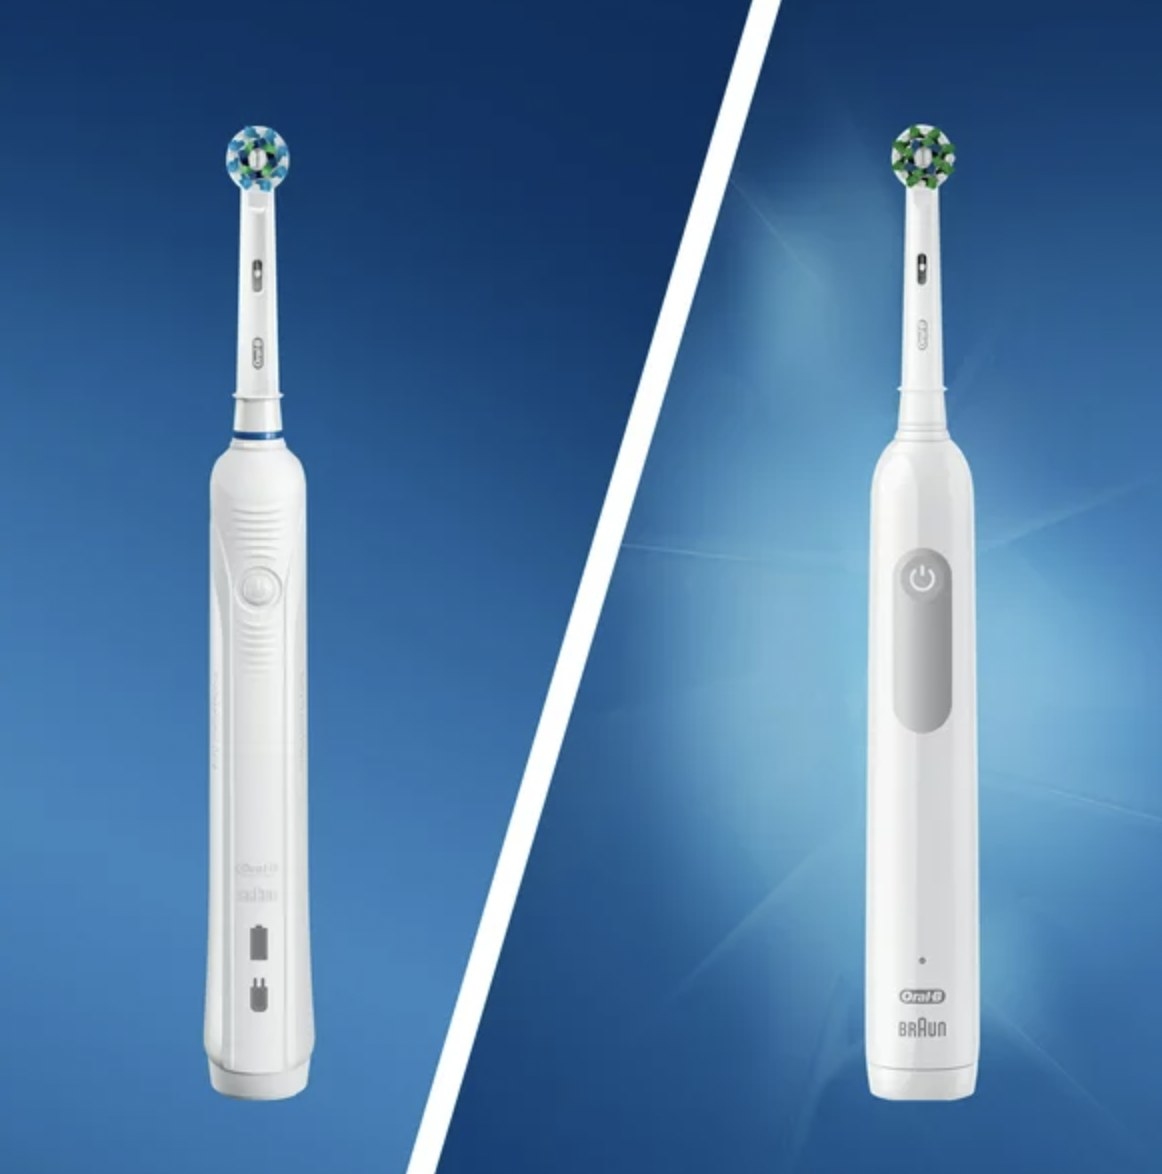 Split screen of the electric toothbrush uncharged and charged up and ready to go